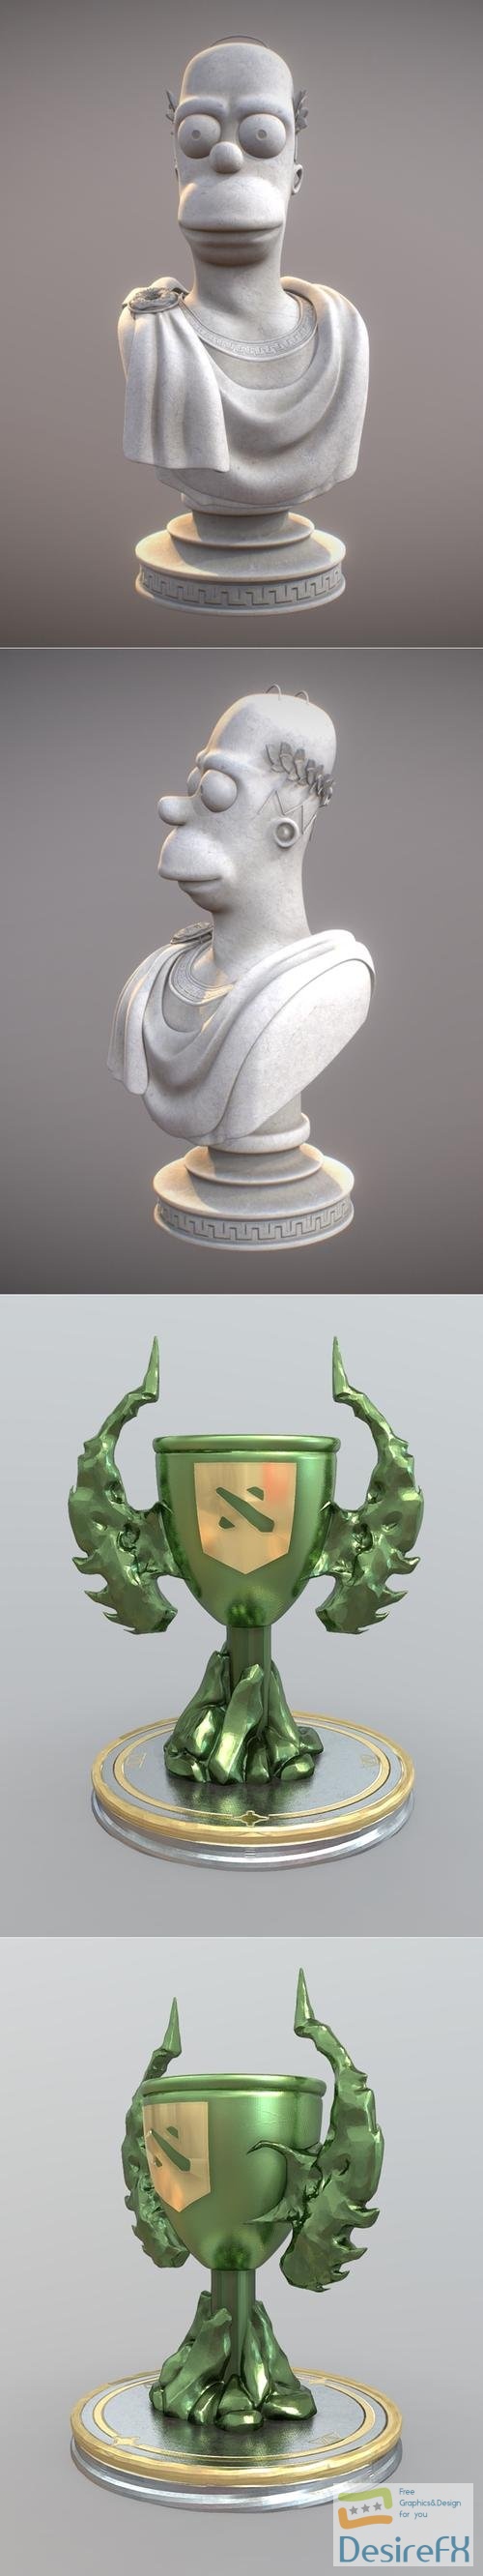 Emperor Homer and Dota 2 - Battle Cup – 3D Print